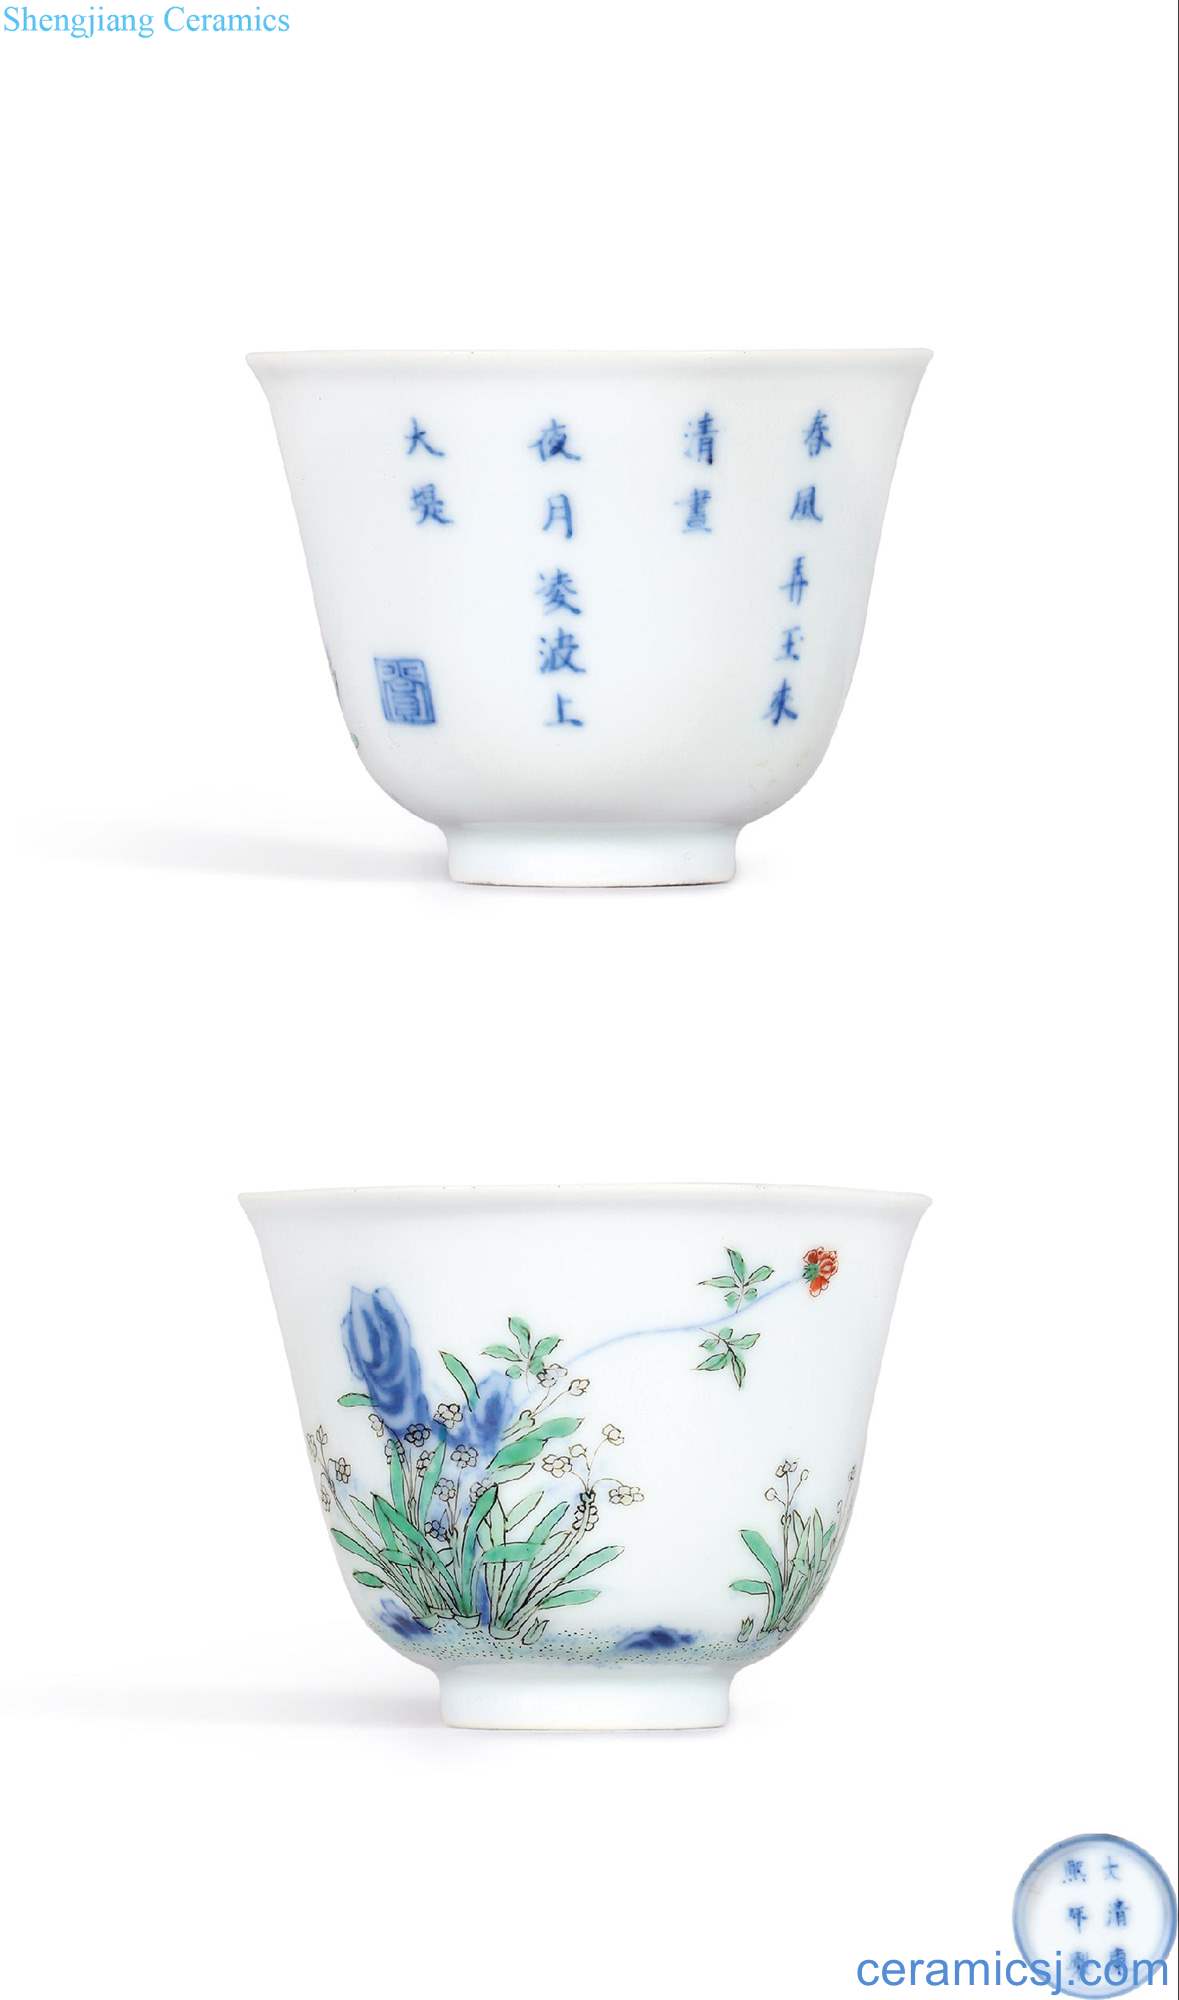 The qing emperor kangxi "December narcissus" god of cup